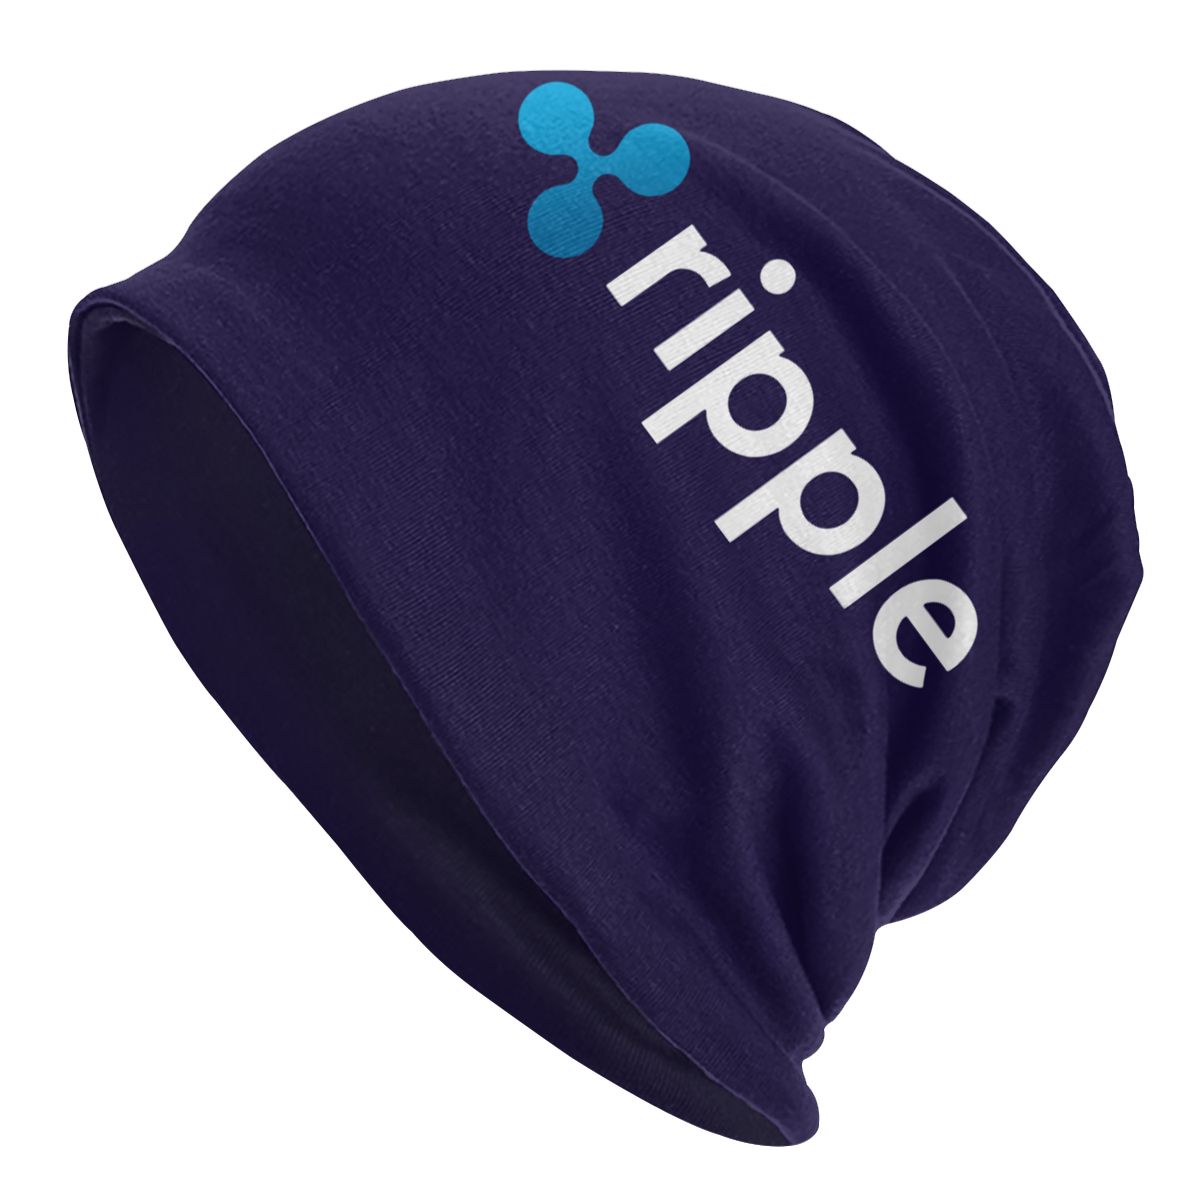 Ripple XRP knitted hat